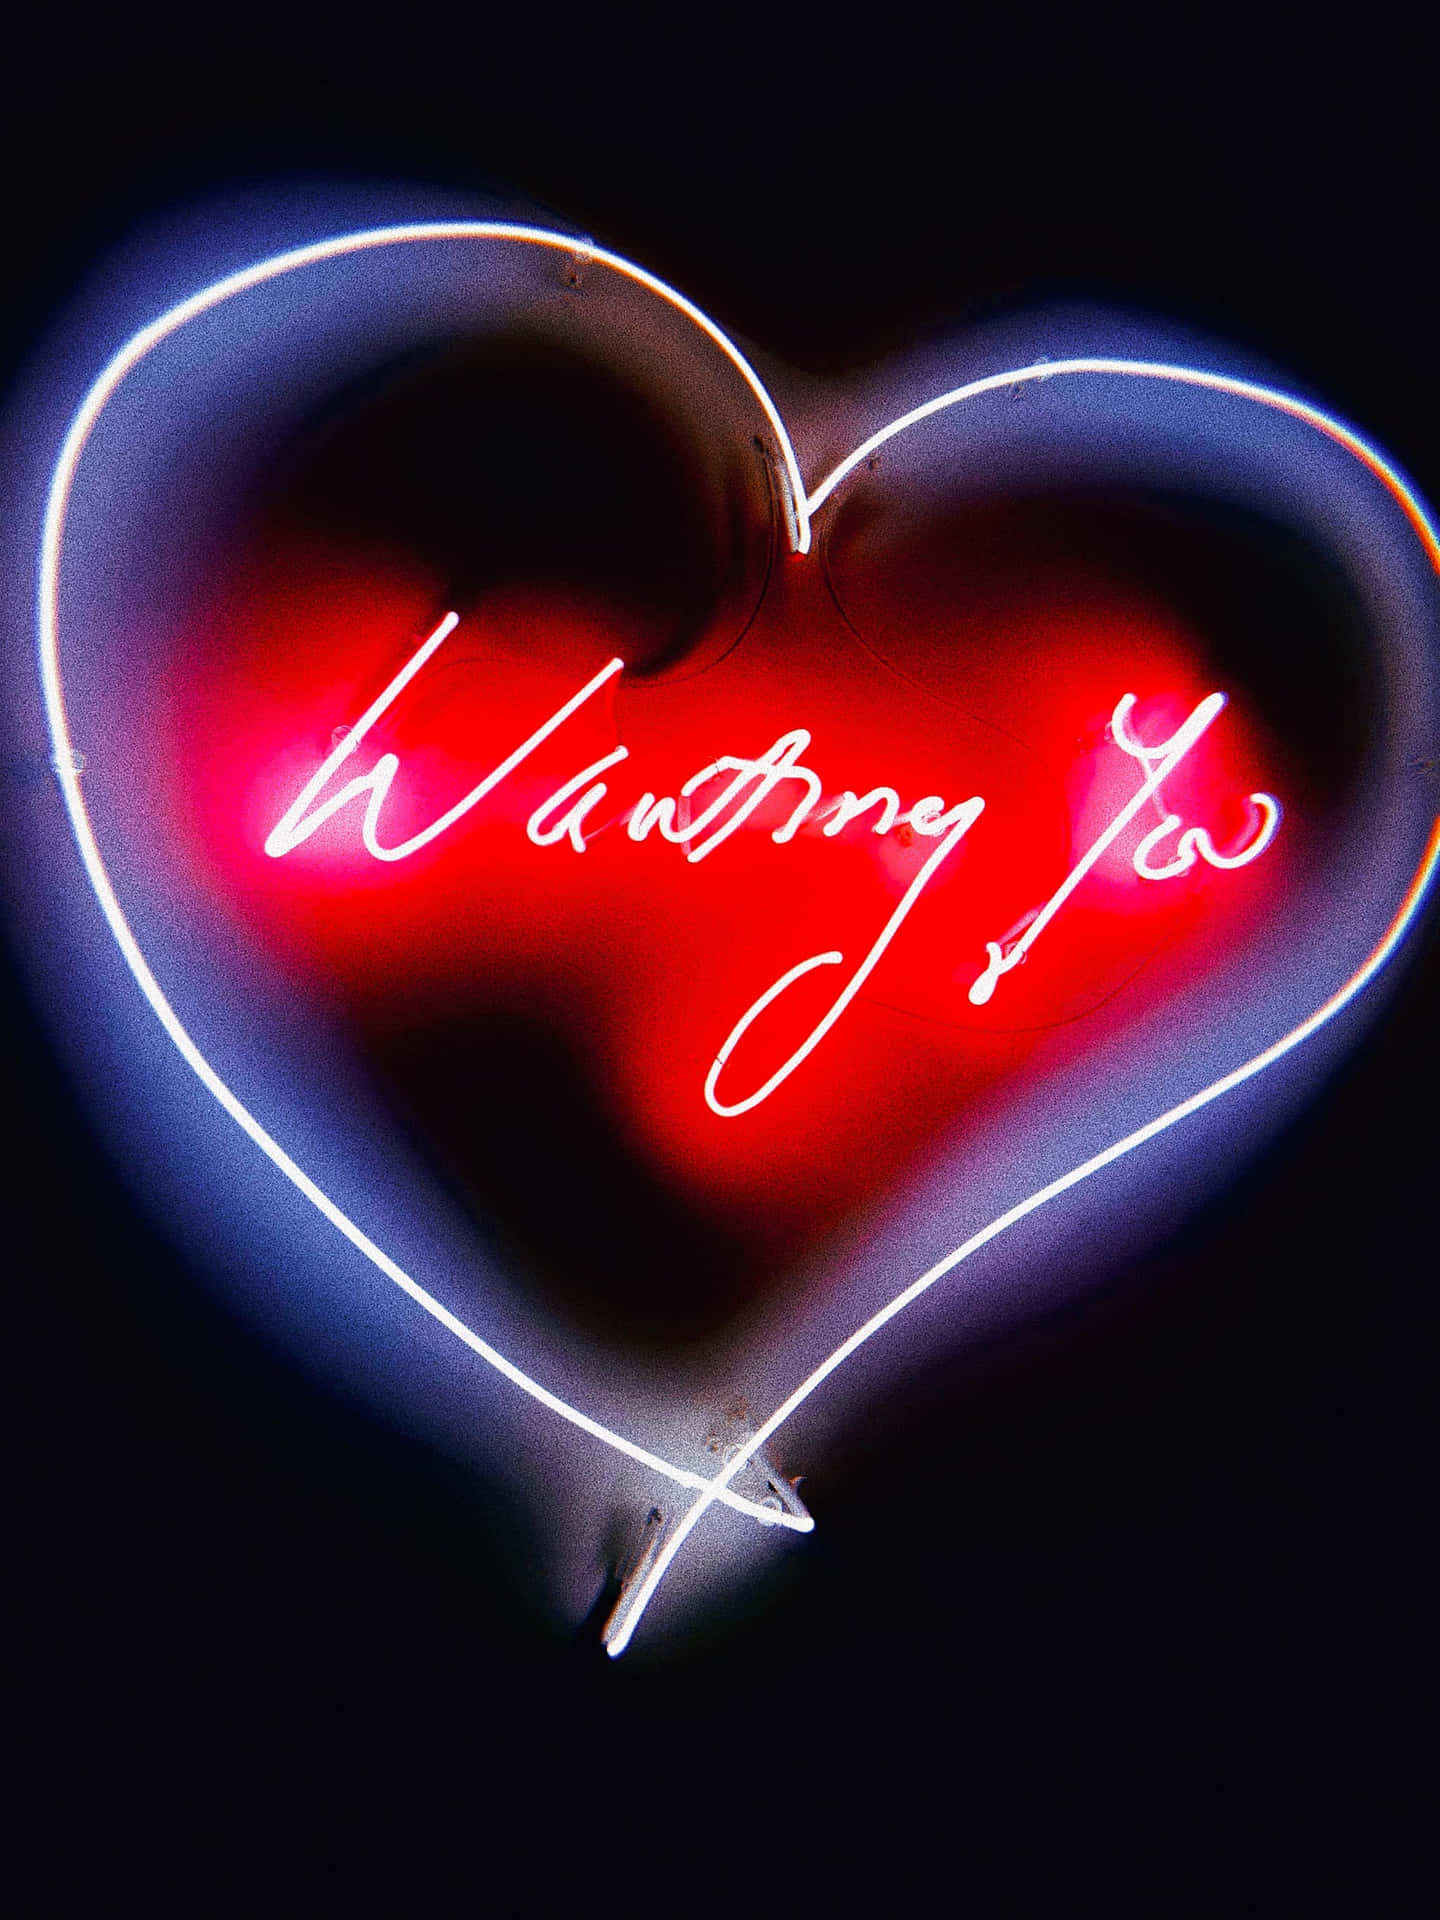 Neon Lights Waiting You Aesthetic Valentine's Day Wallpaper